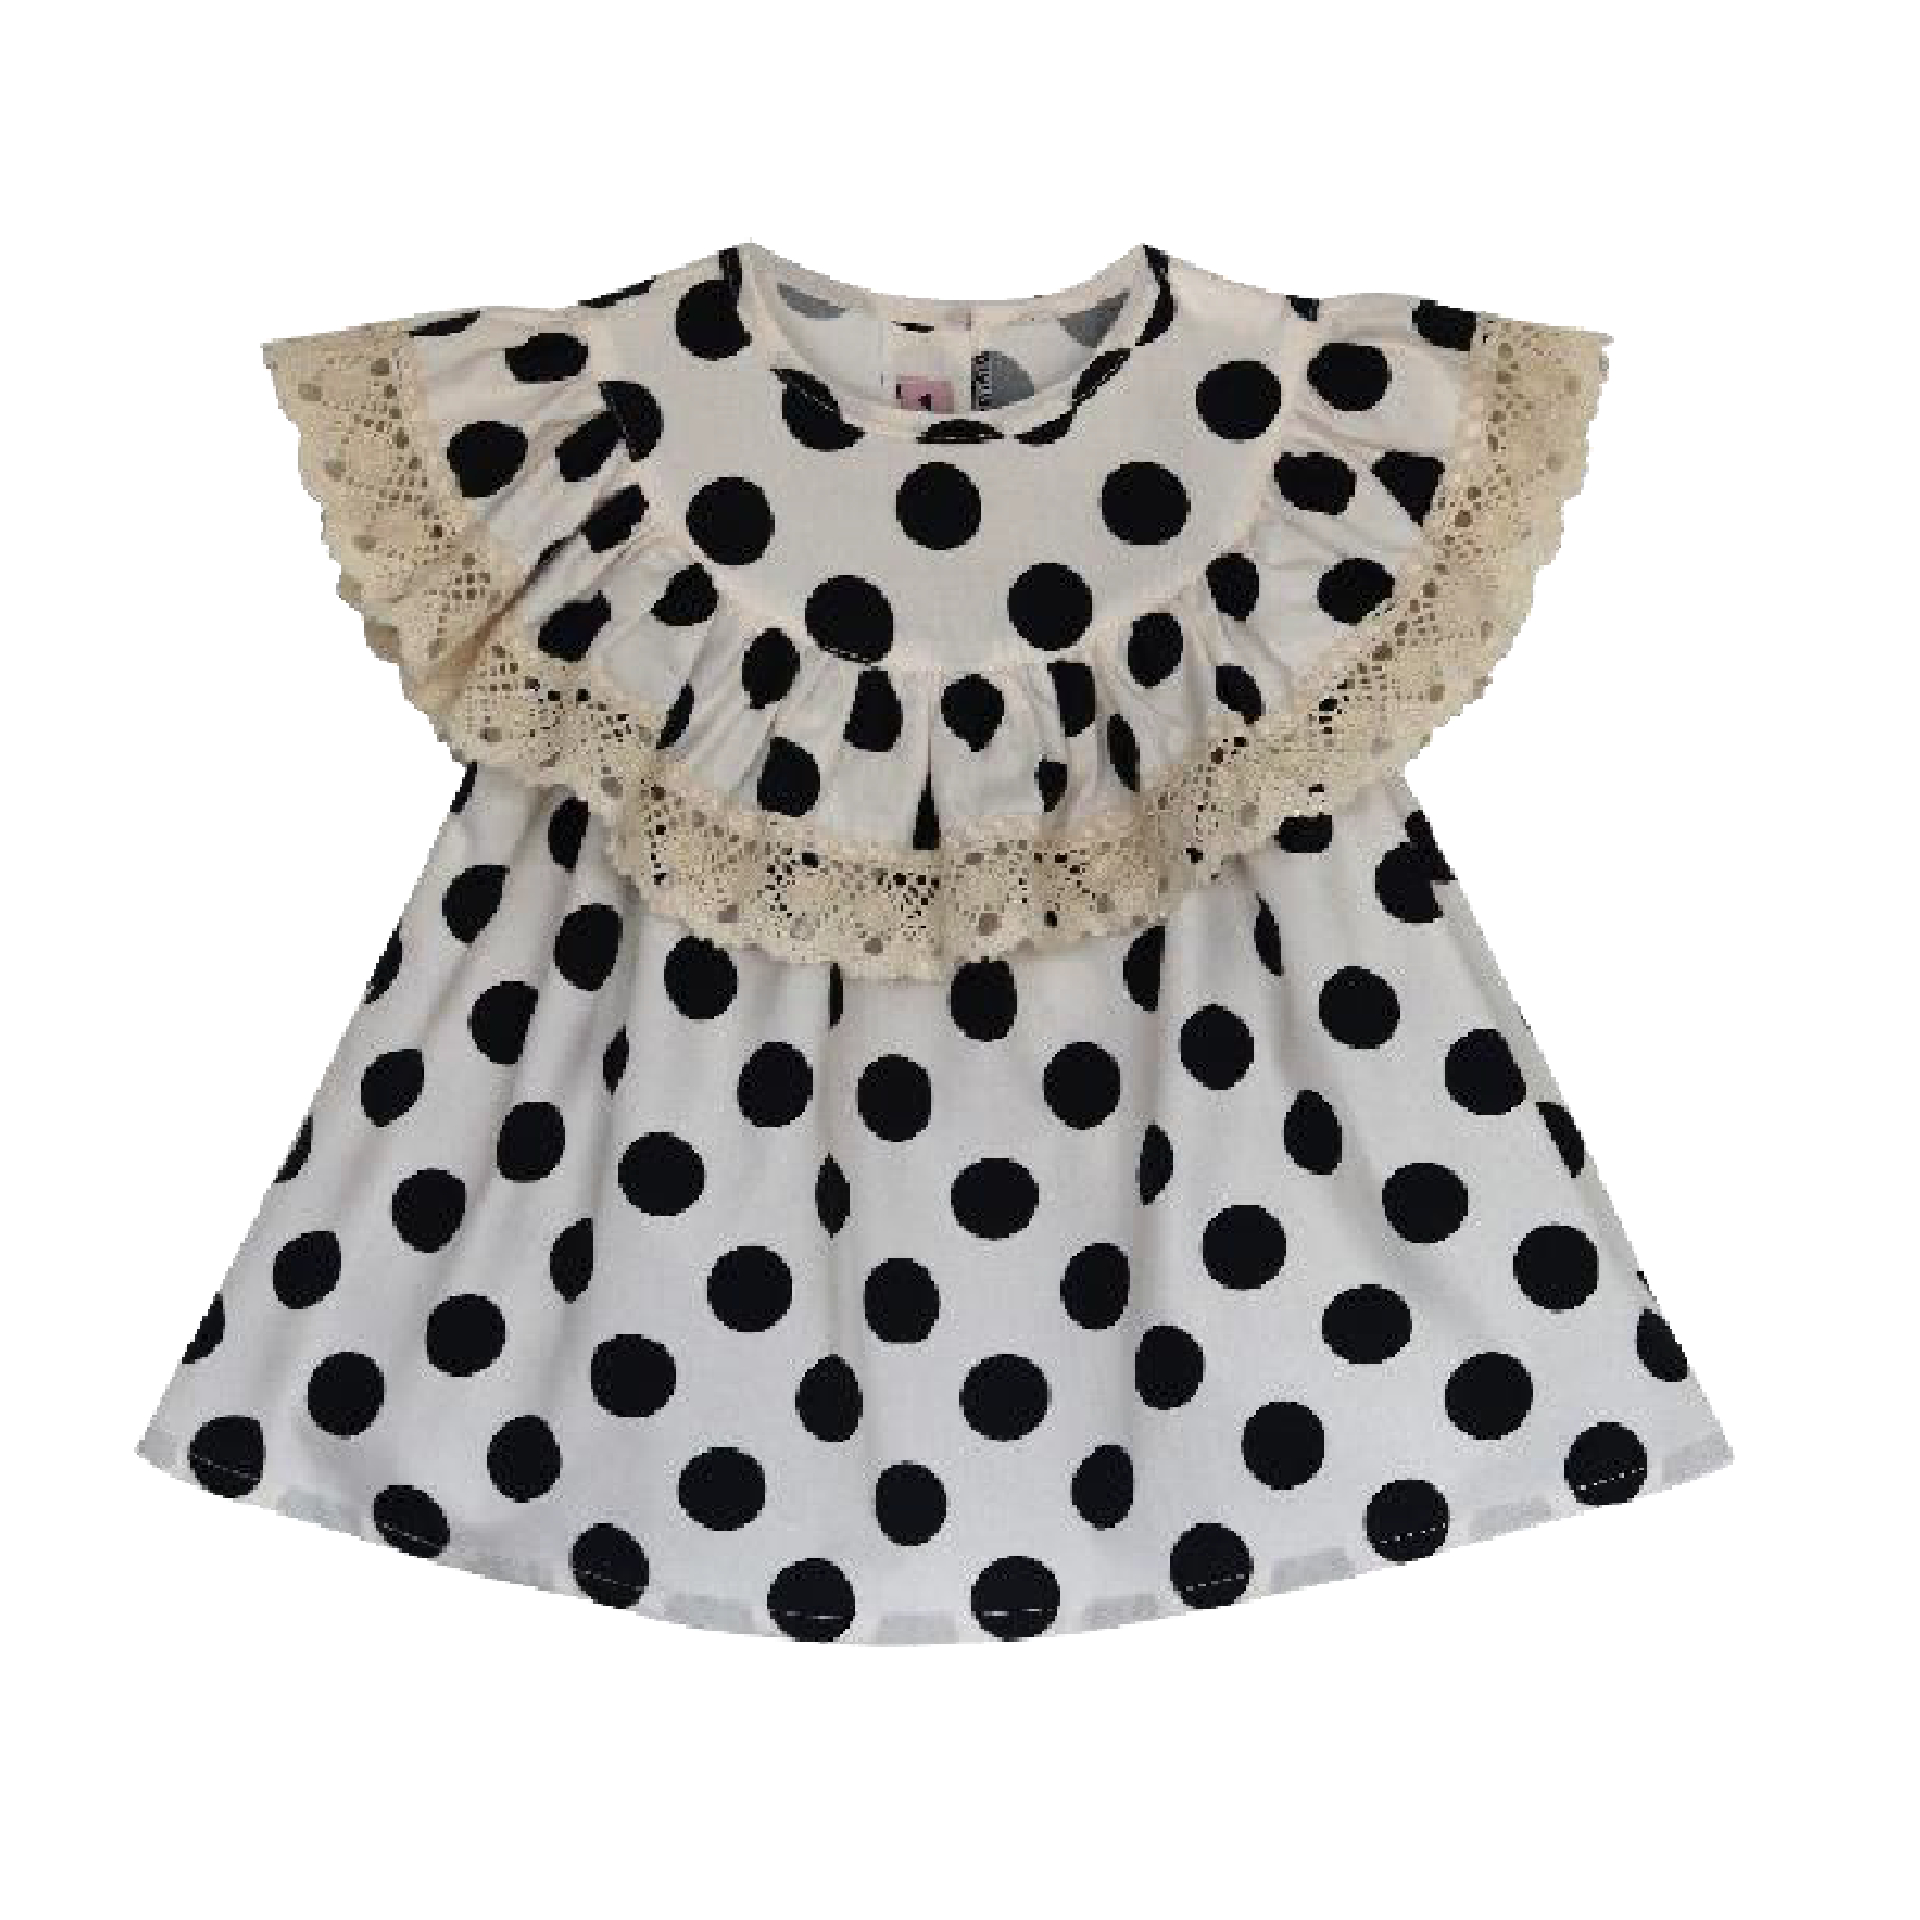 Ivory with black dots frill blouse